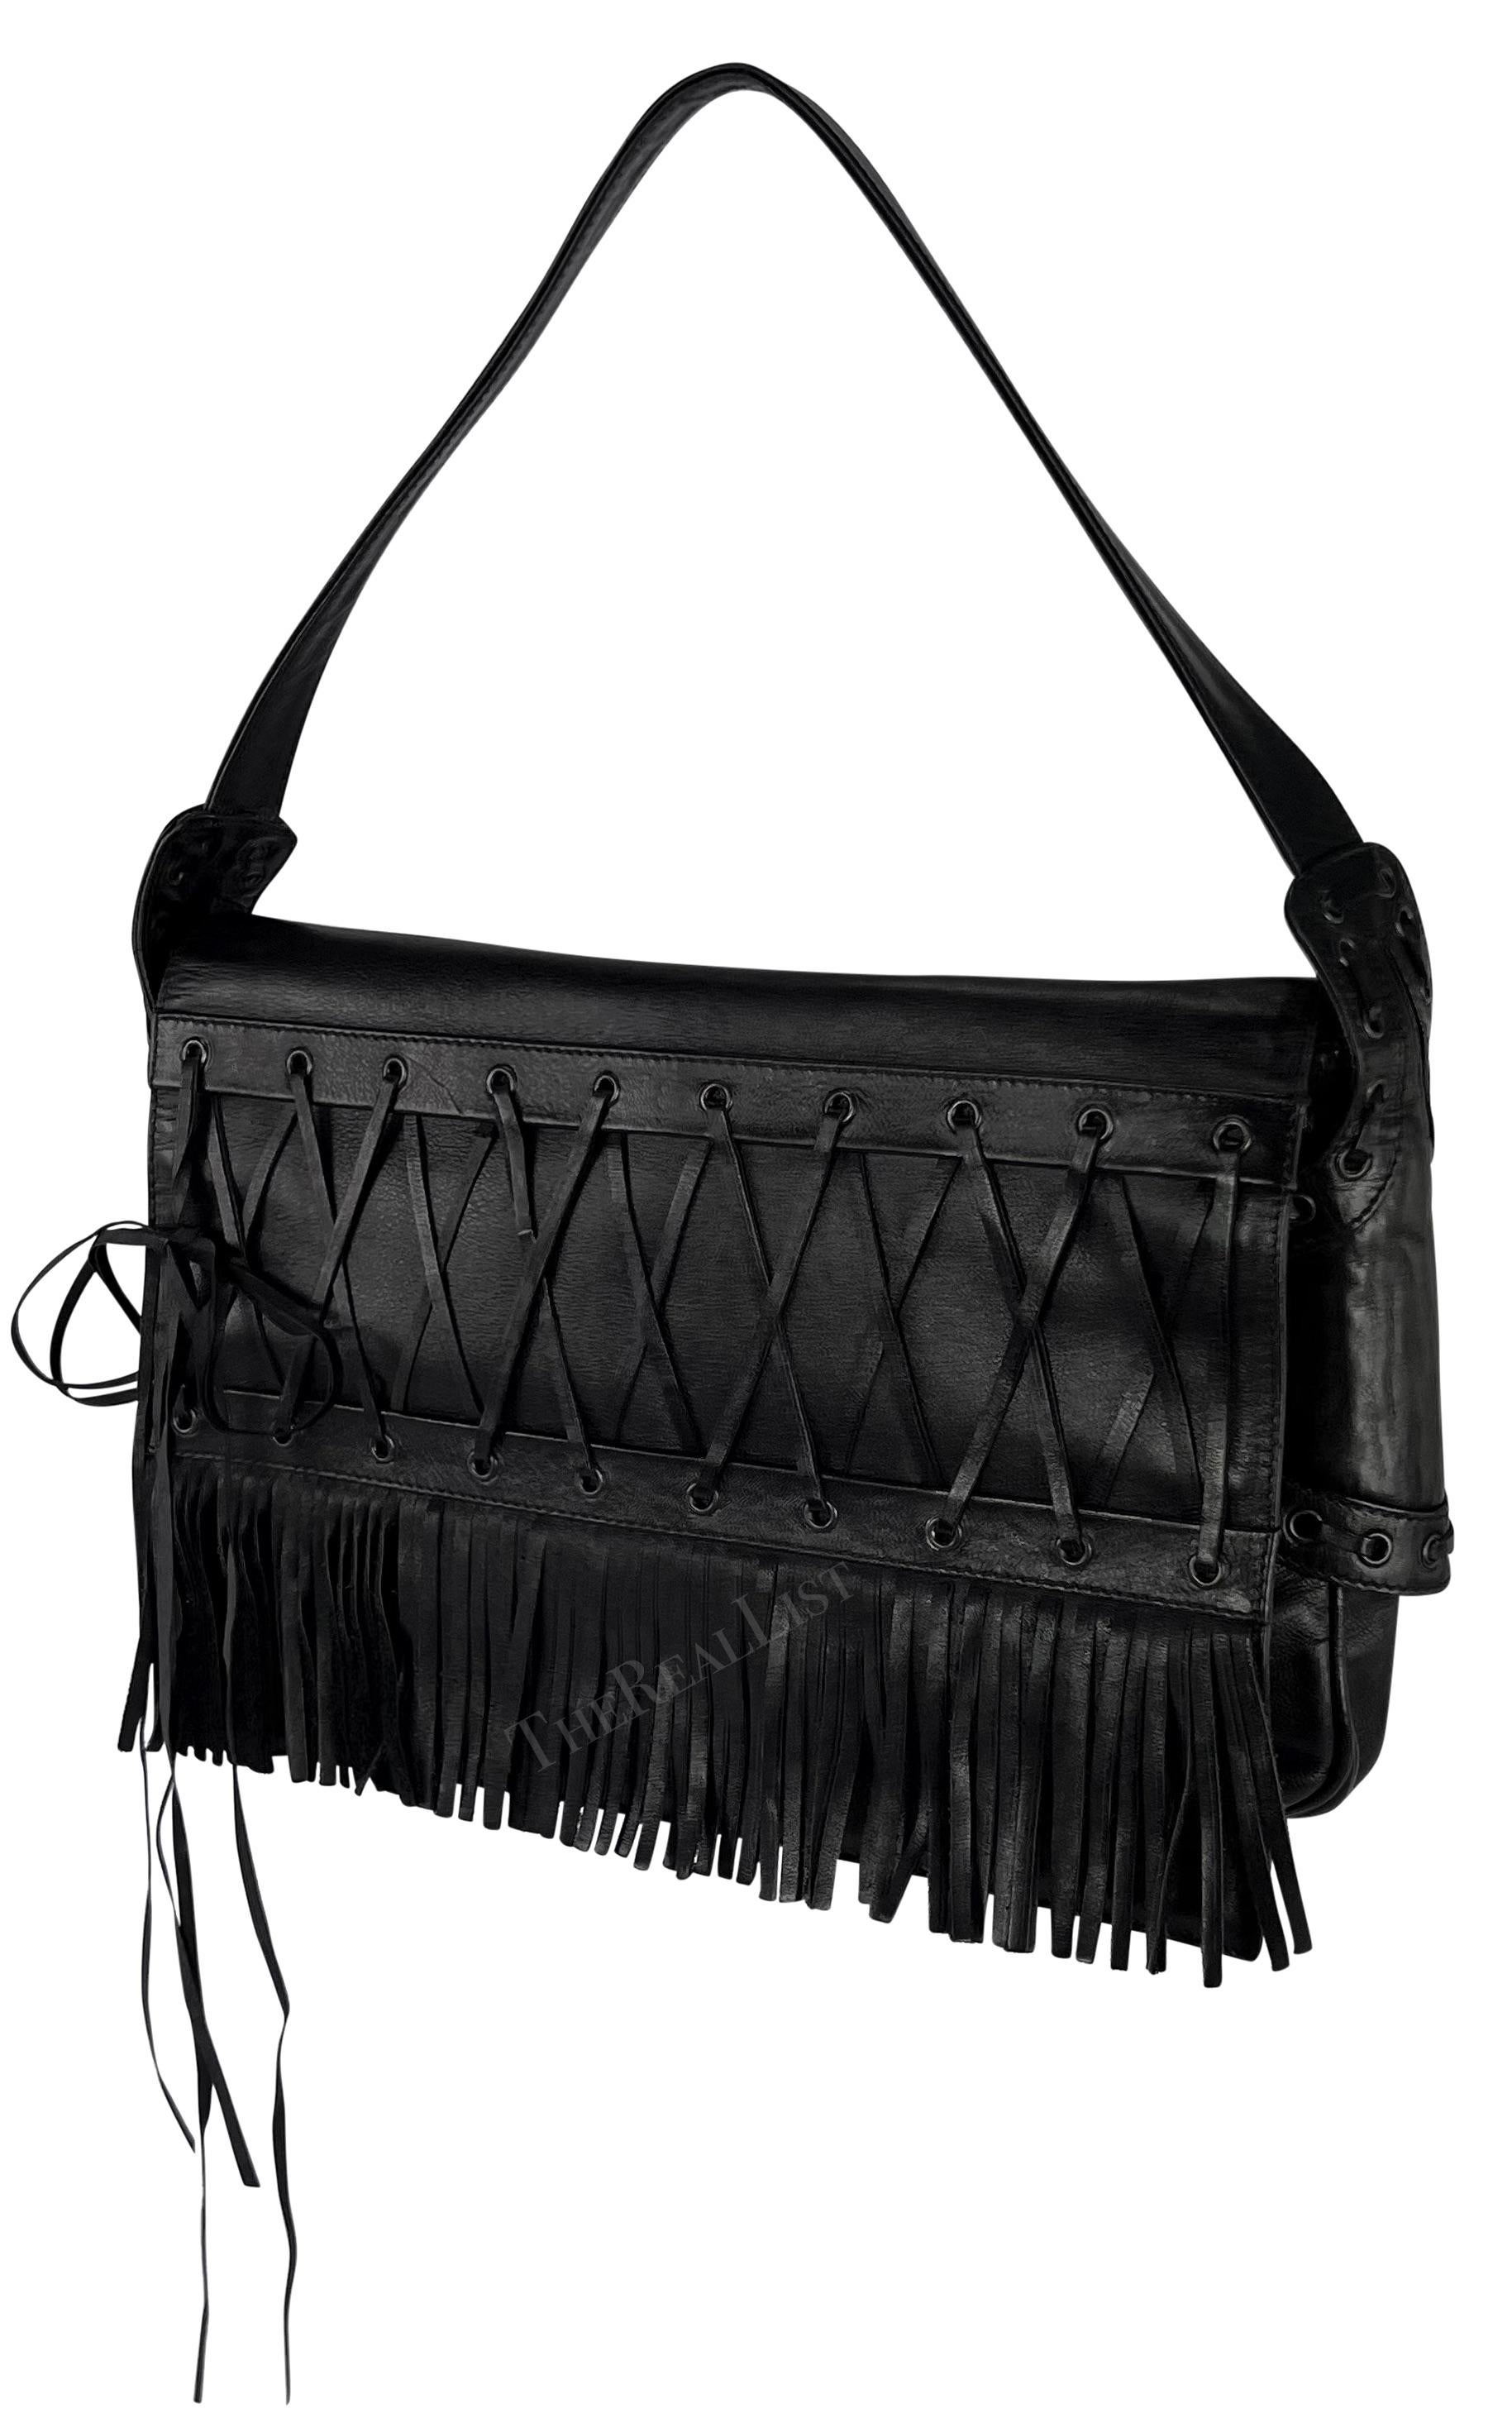 Presenting an incredible black leather shoulder bag by Gianni Versace, designed by Donatella Versace from the Spring/Summer 2002 collection. This bag, crafted entirely from black leather, showcases a lace-up accent and fringe on the front flap,